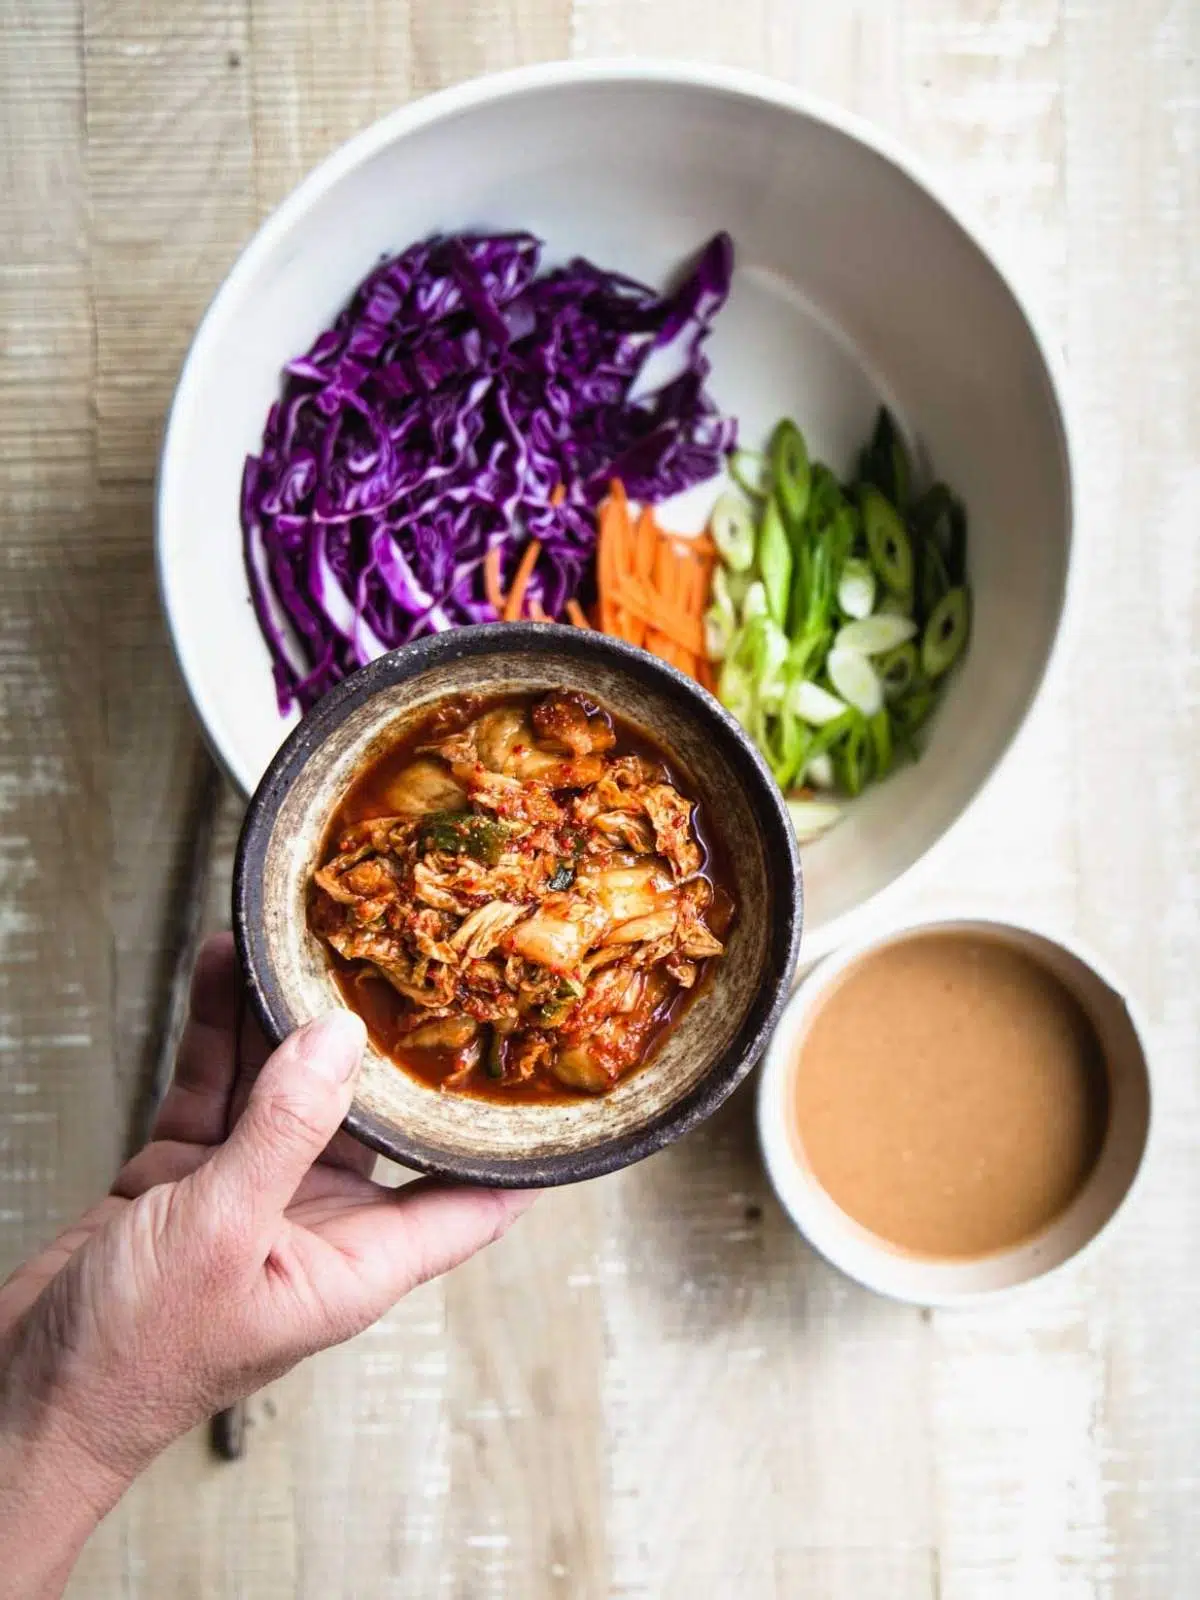 Kimchi and vegetables in a bowl with salad dressing. 